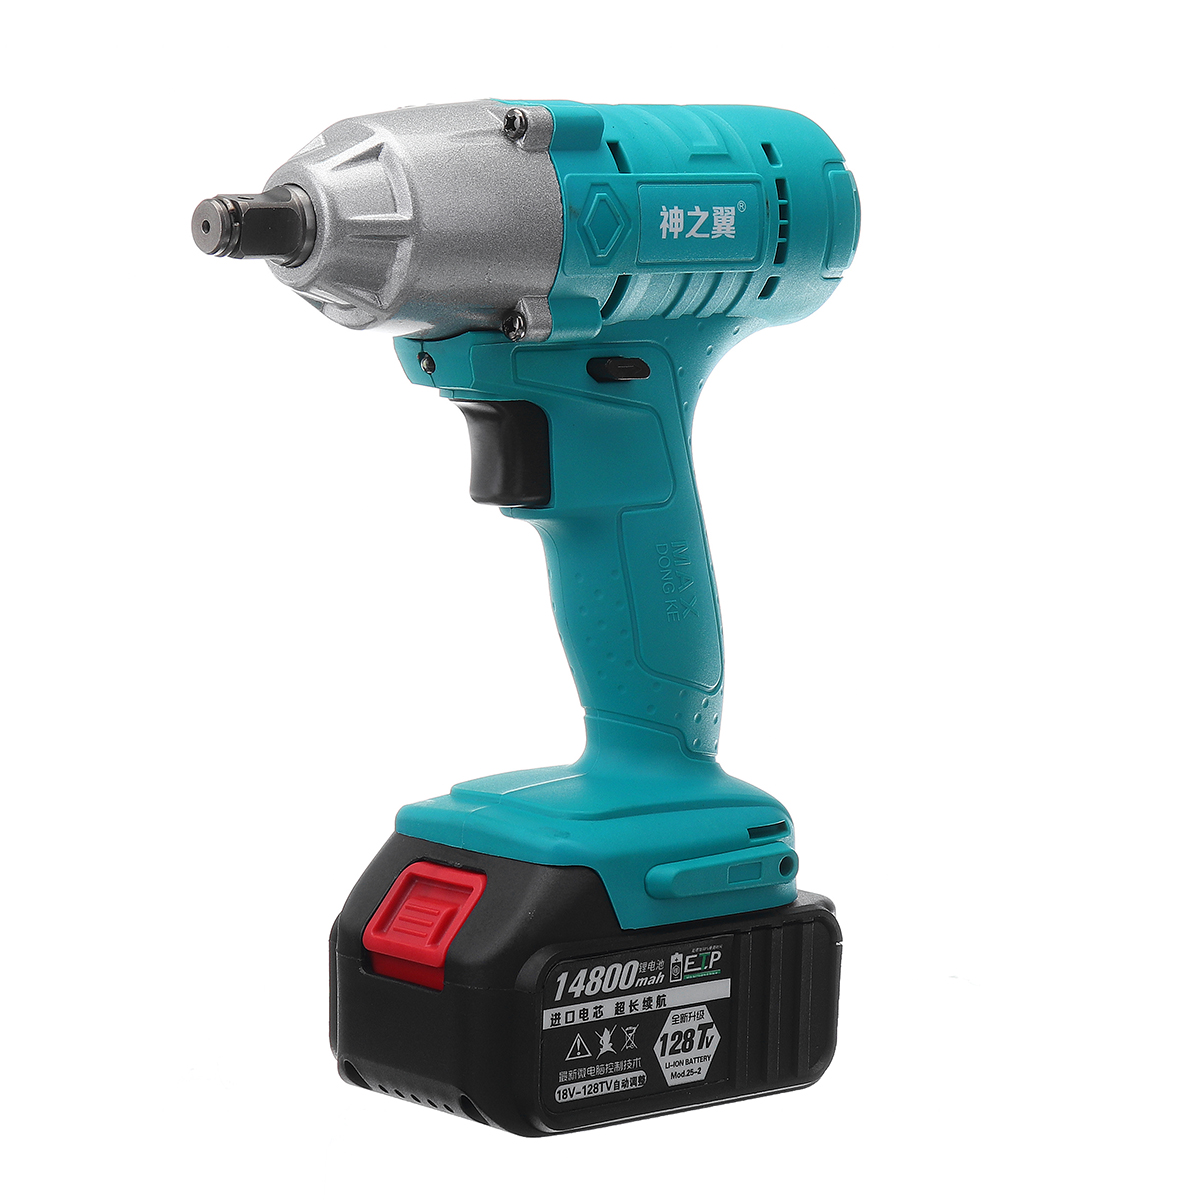 

128Tv 14800mAh Lithium Battery Cordless Electric Wrench 280N.m Impact Drill Driver Kit